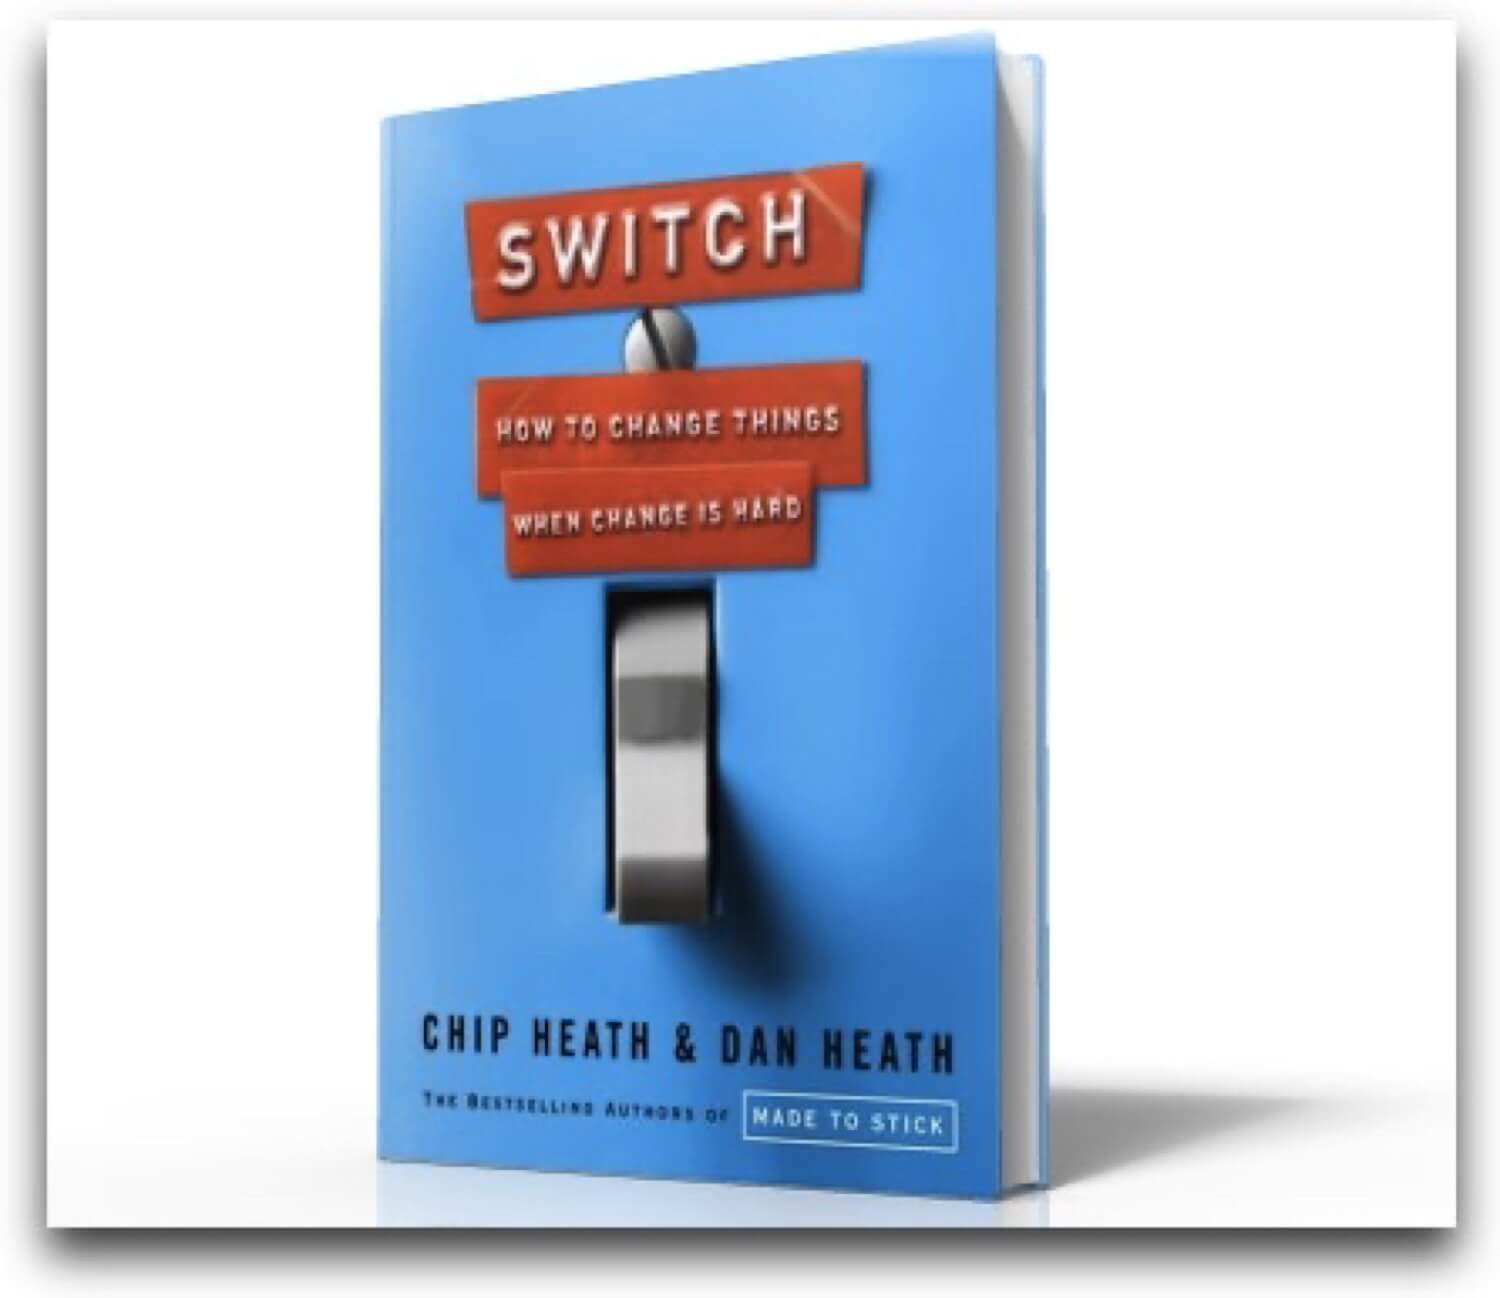 Book review: SWITCH by Heath brothers - a positive way to change